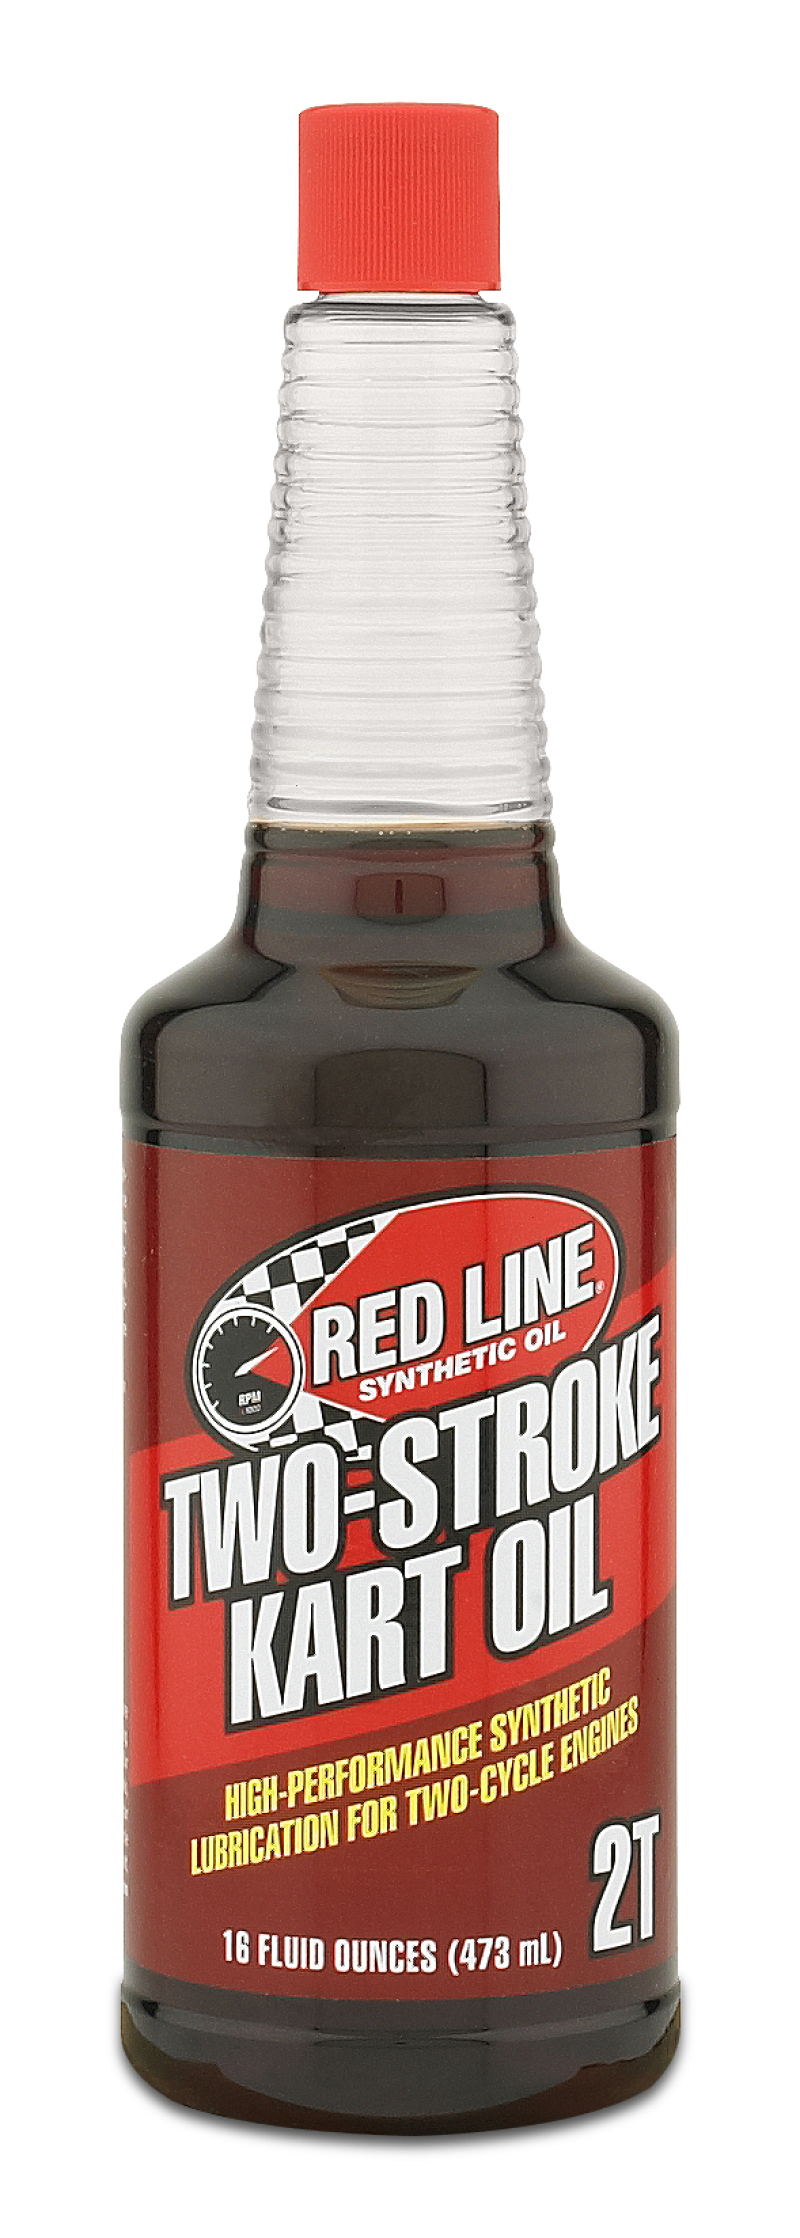 Red Line Two-Cycle Kart Oil - 16oz. - 40403